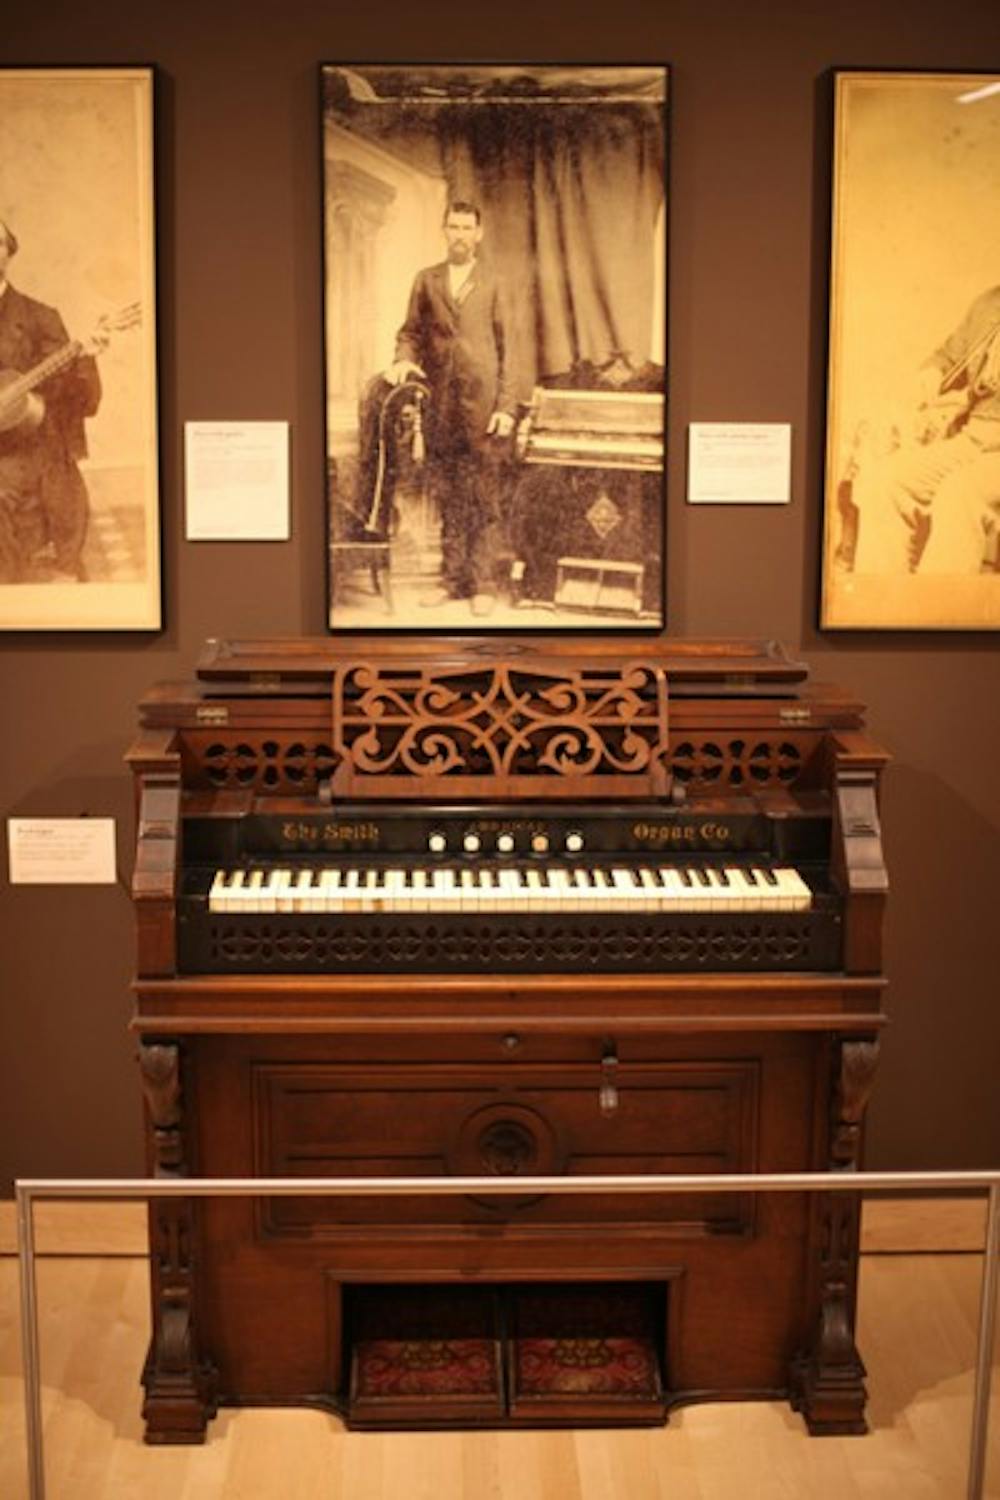 Courtesy of the Musical Instrument Museum